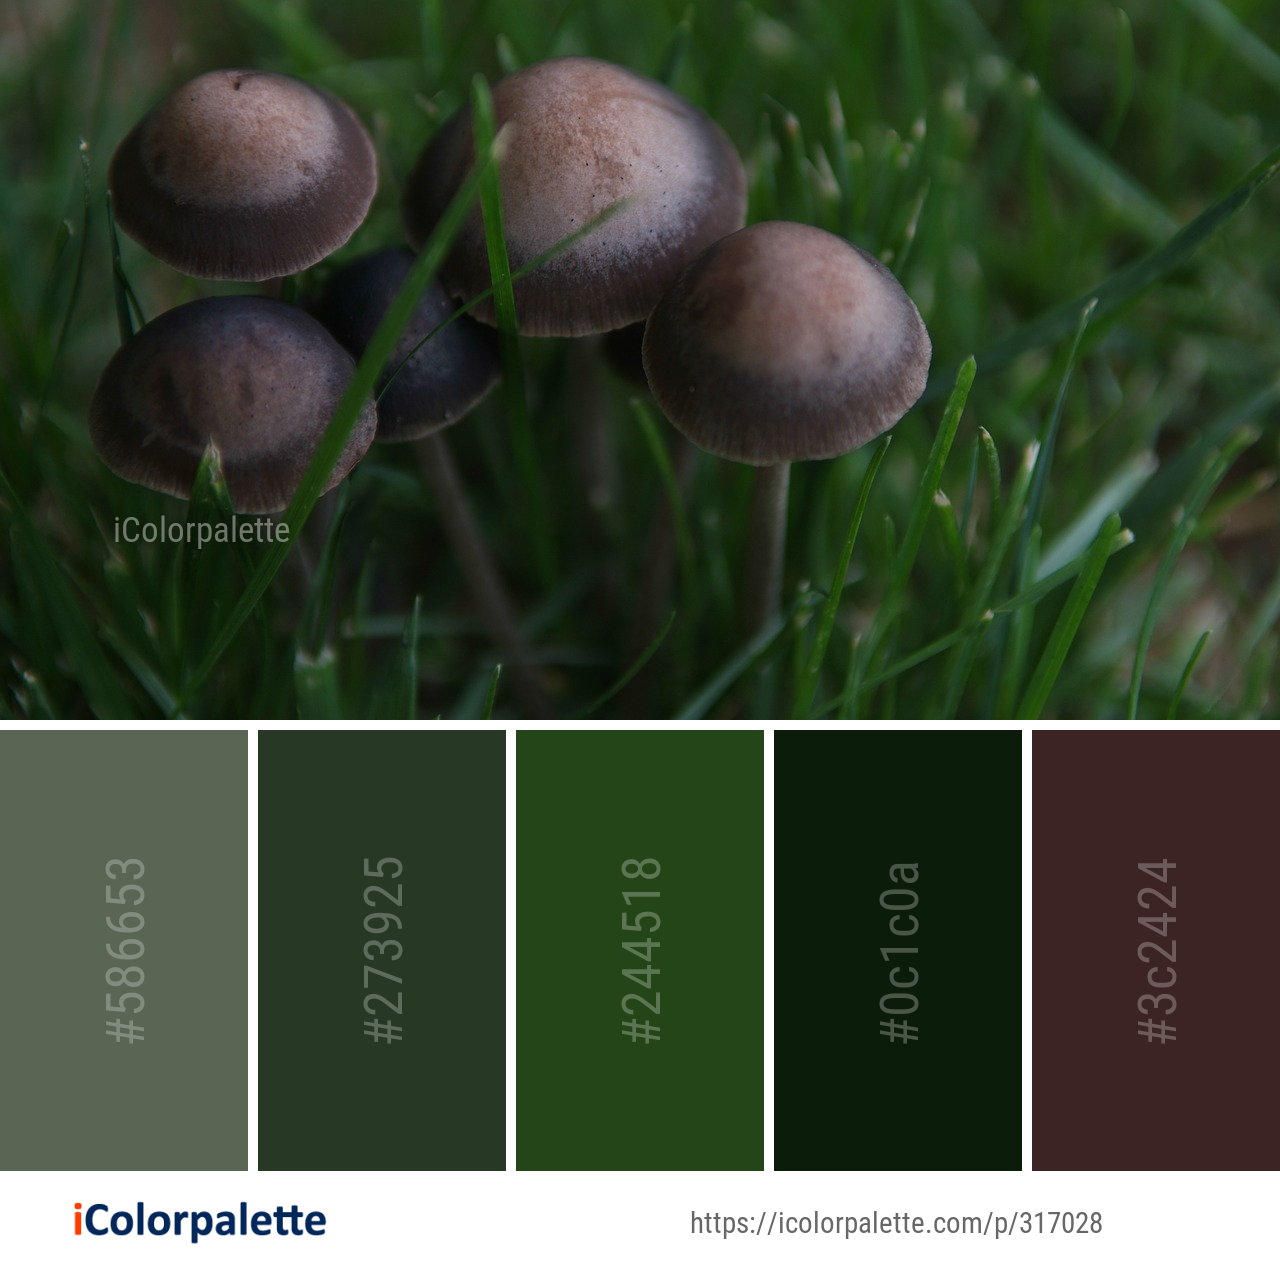 Color Palette Ideas from Mushroom Fungus Edible Image | iColorpalette